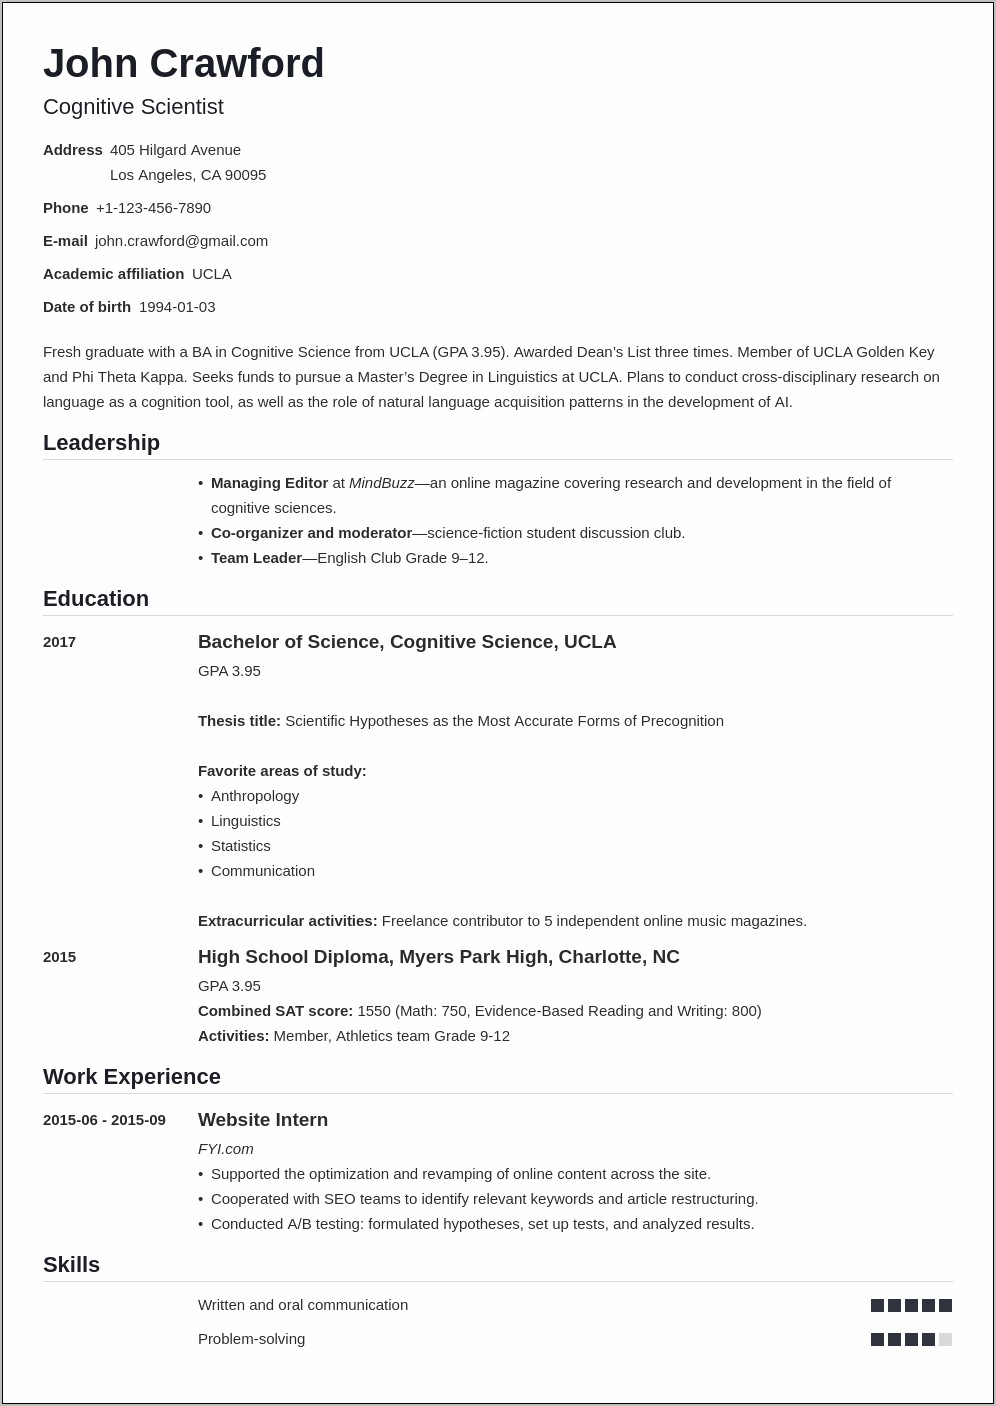 Curricular Activities In Resume Sample